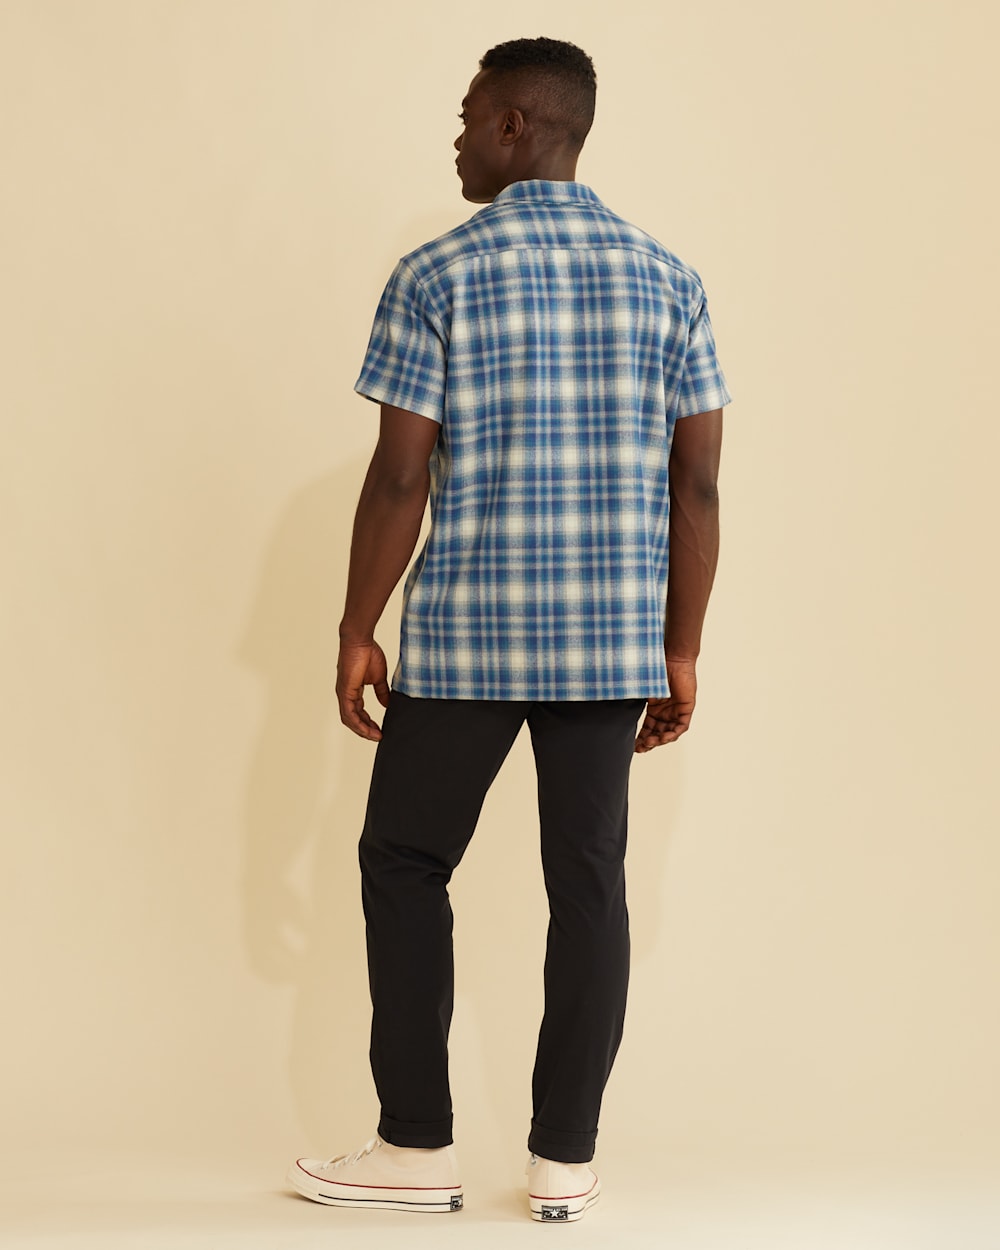 ALTERNATE VIEW OF MEN'S PLAID SHORT-SLEEVE BOARD SHIRT IN BLUE/WHITE PLAID image number 3